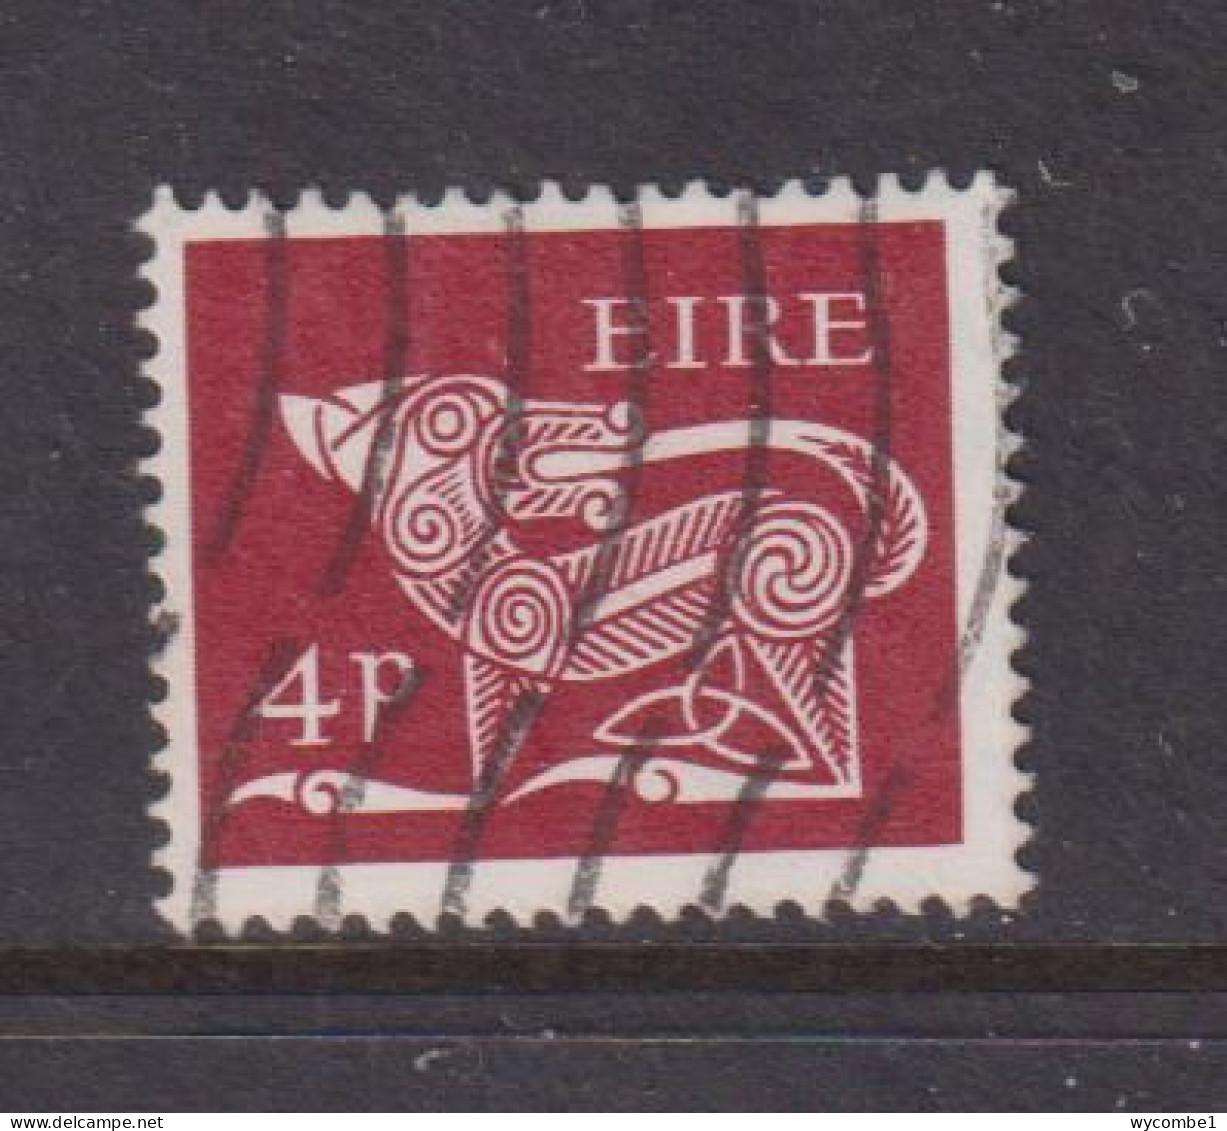 IRELAND - 1968  Definitives  4d  Used As Scan - Usati